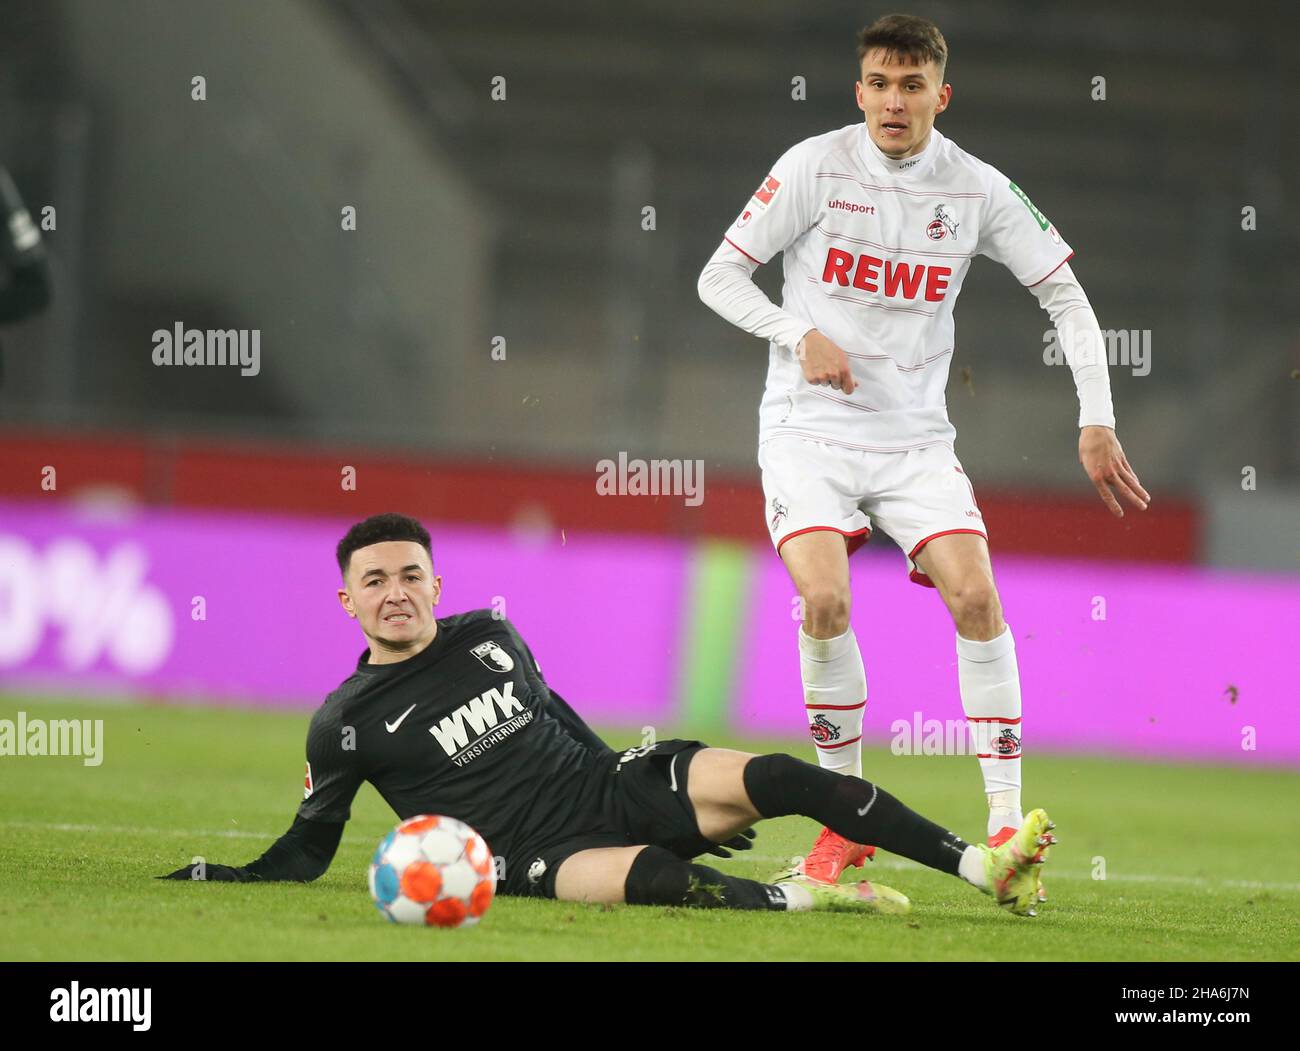 Koeln, Germany. 10th Dec, 2021. Dejan Ljubicic of Koeln, (R) and Ruben Vargas (L) of FC Augsburg are seen in action during the Bundesliga soccer match between Augsburg Vs FC Koeln at the RheinEnergie Stadium in Koeln( Final score; Augsburg 2:0 FC Koeln) Credit: SOPA Images Limited/Alamy Live News Stock Photo